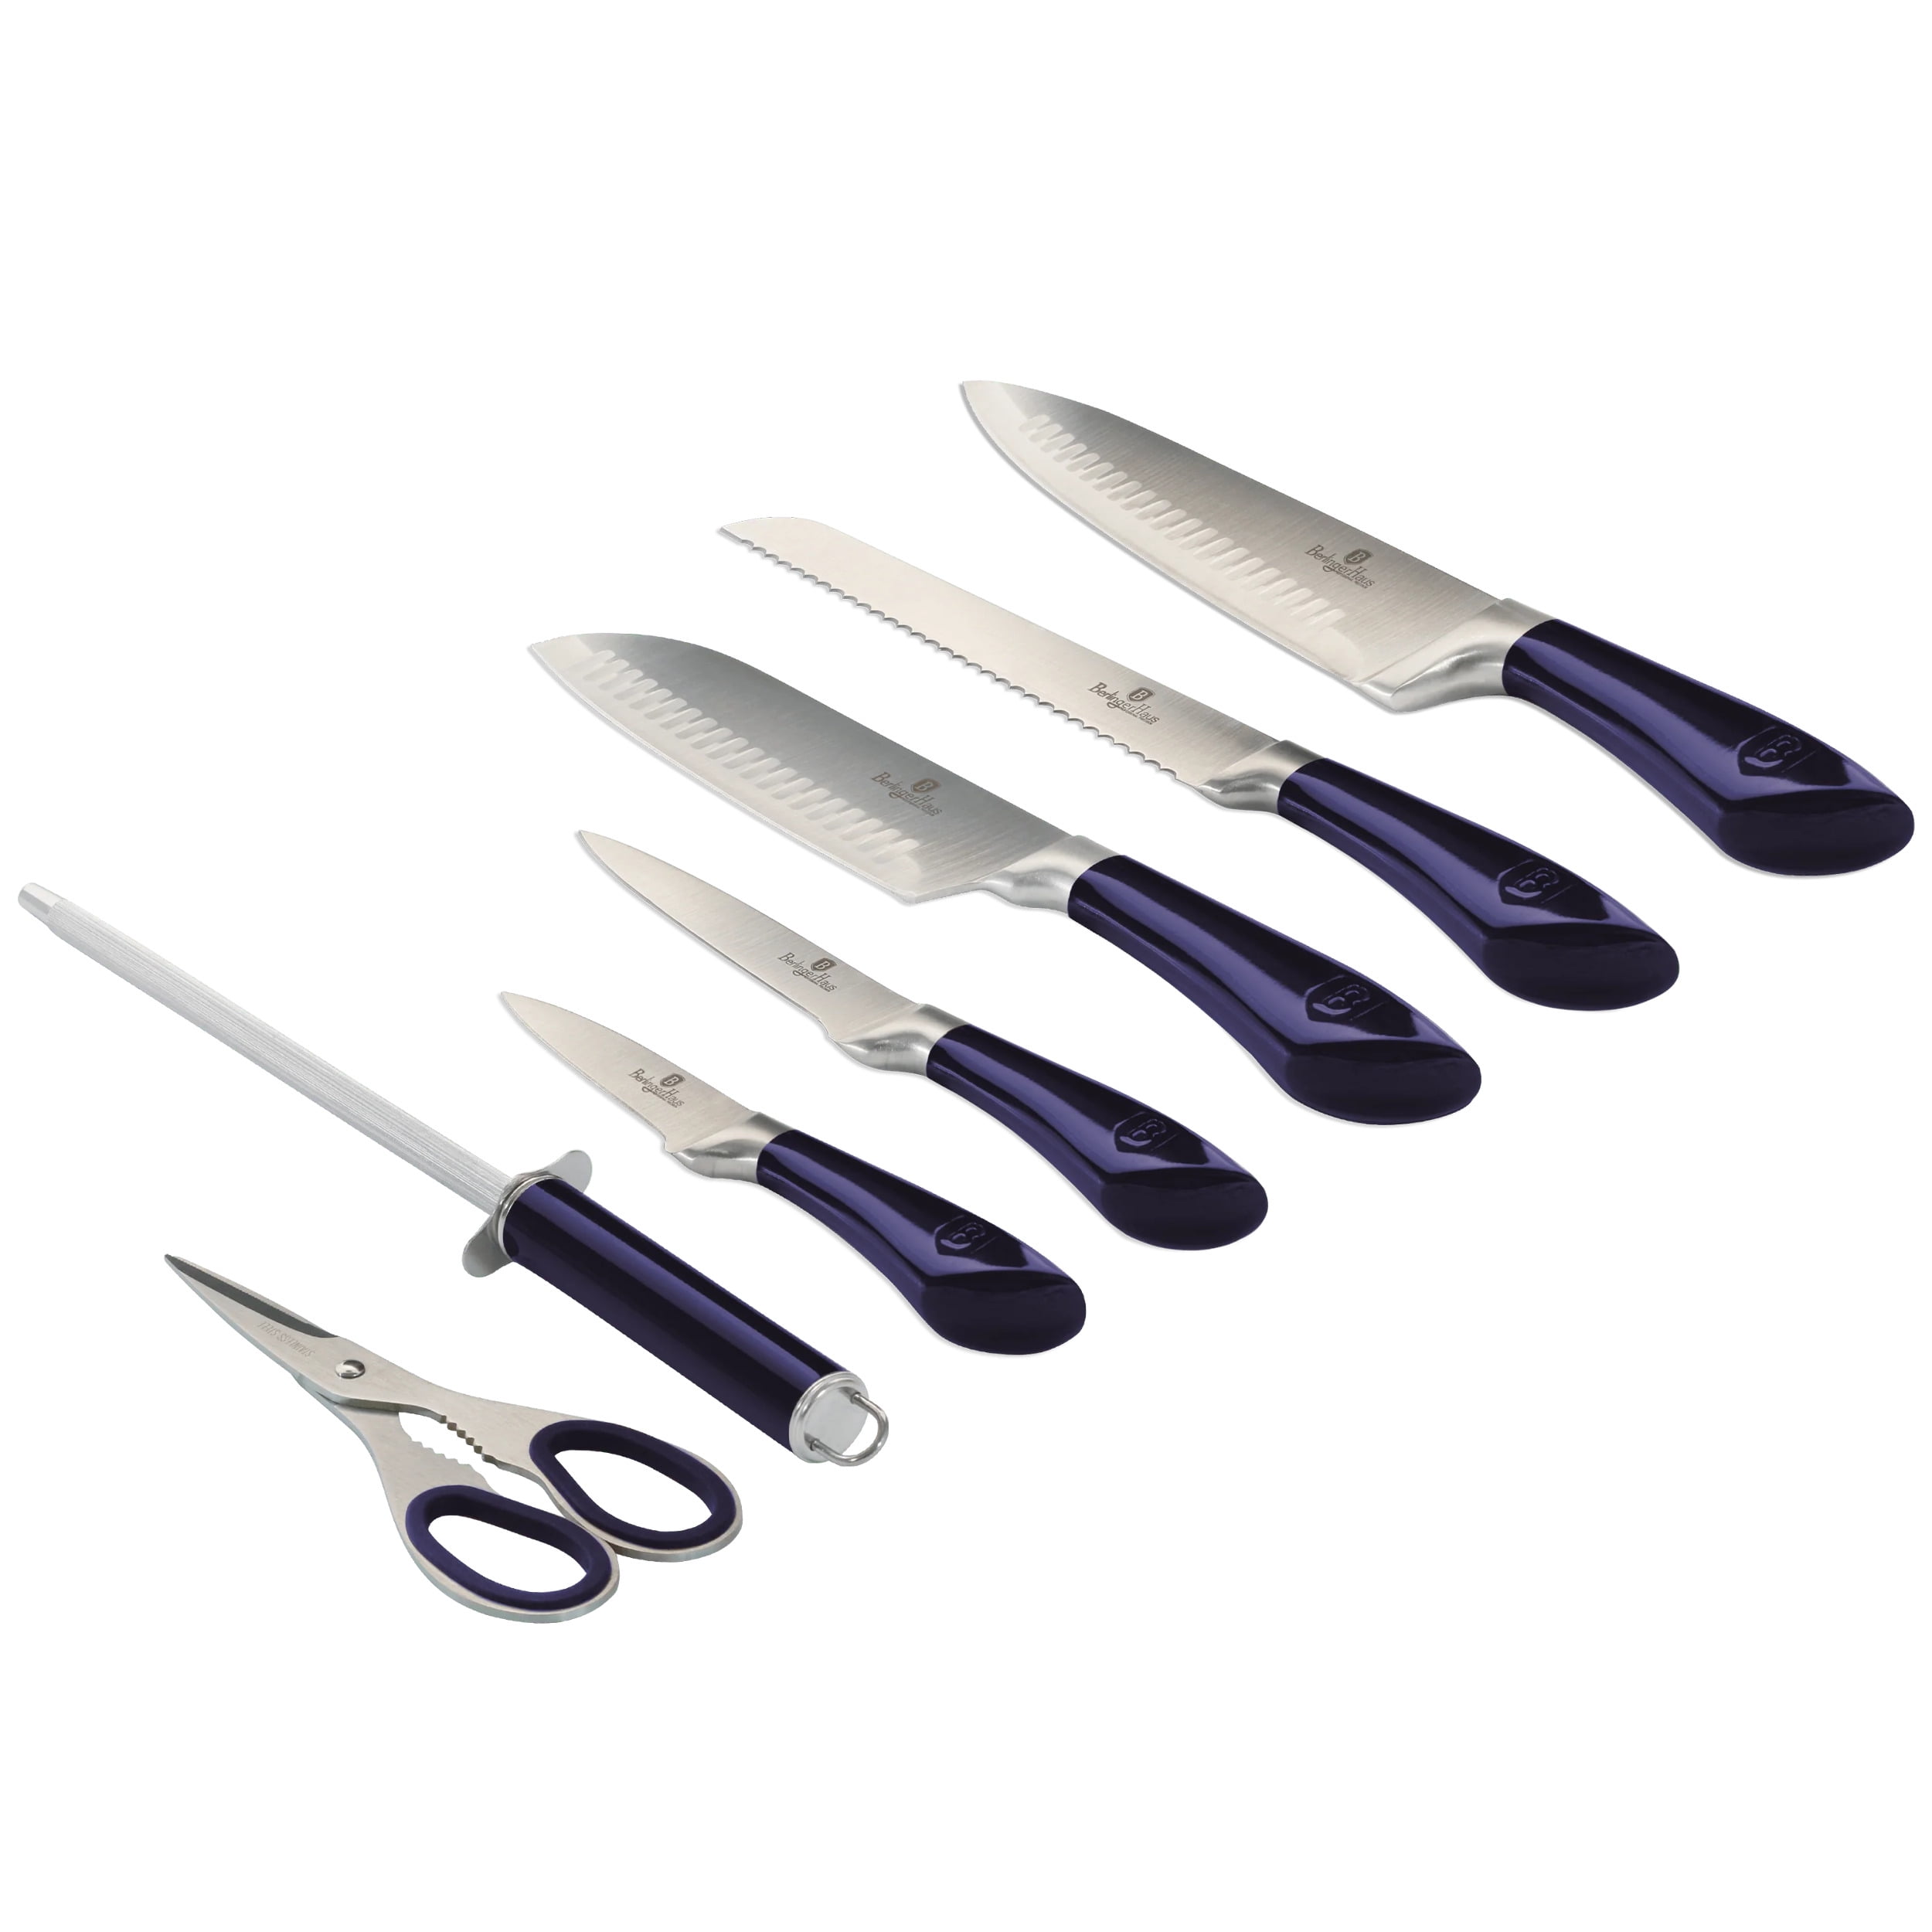 L'Chaim Meats8-Piece Kitchen Knife Set with Acrylic Stand – lchaimmeats